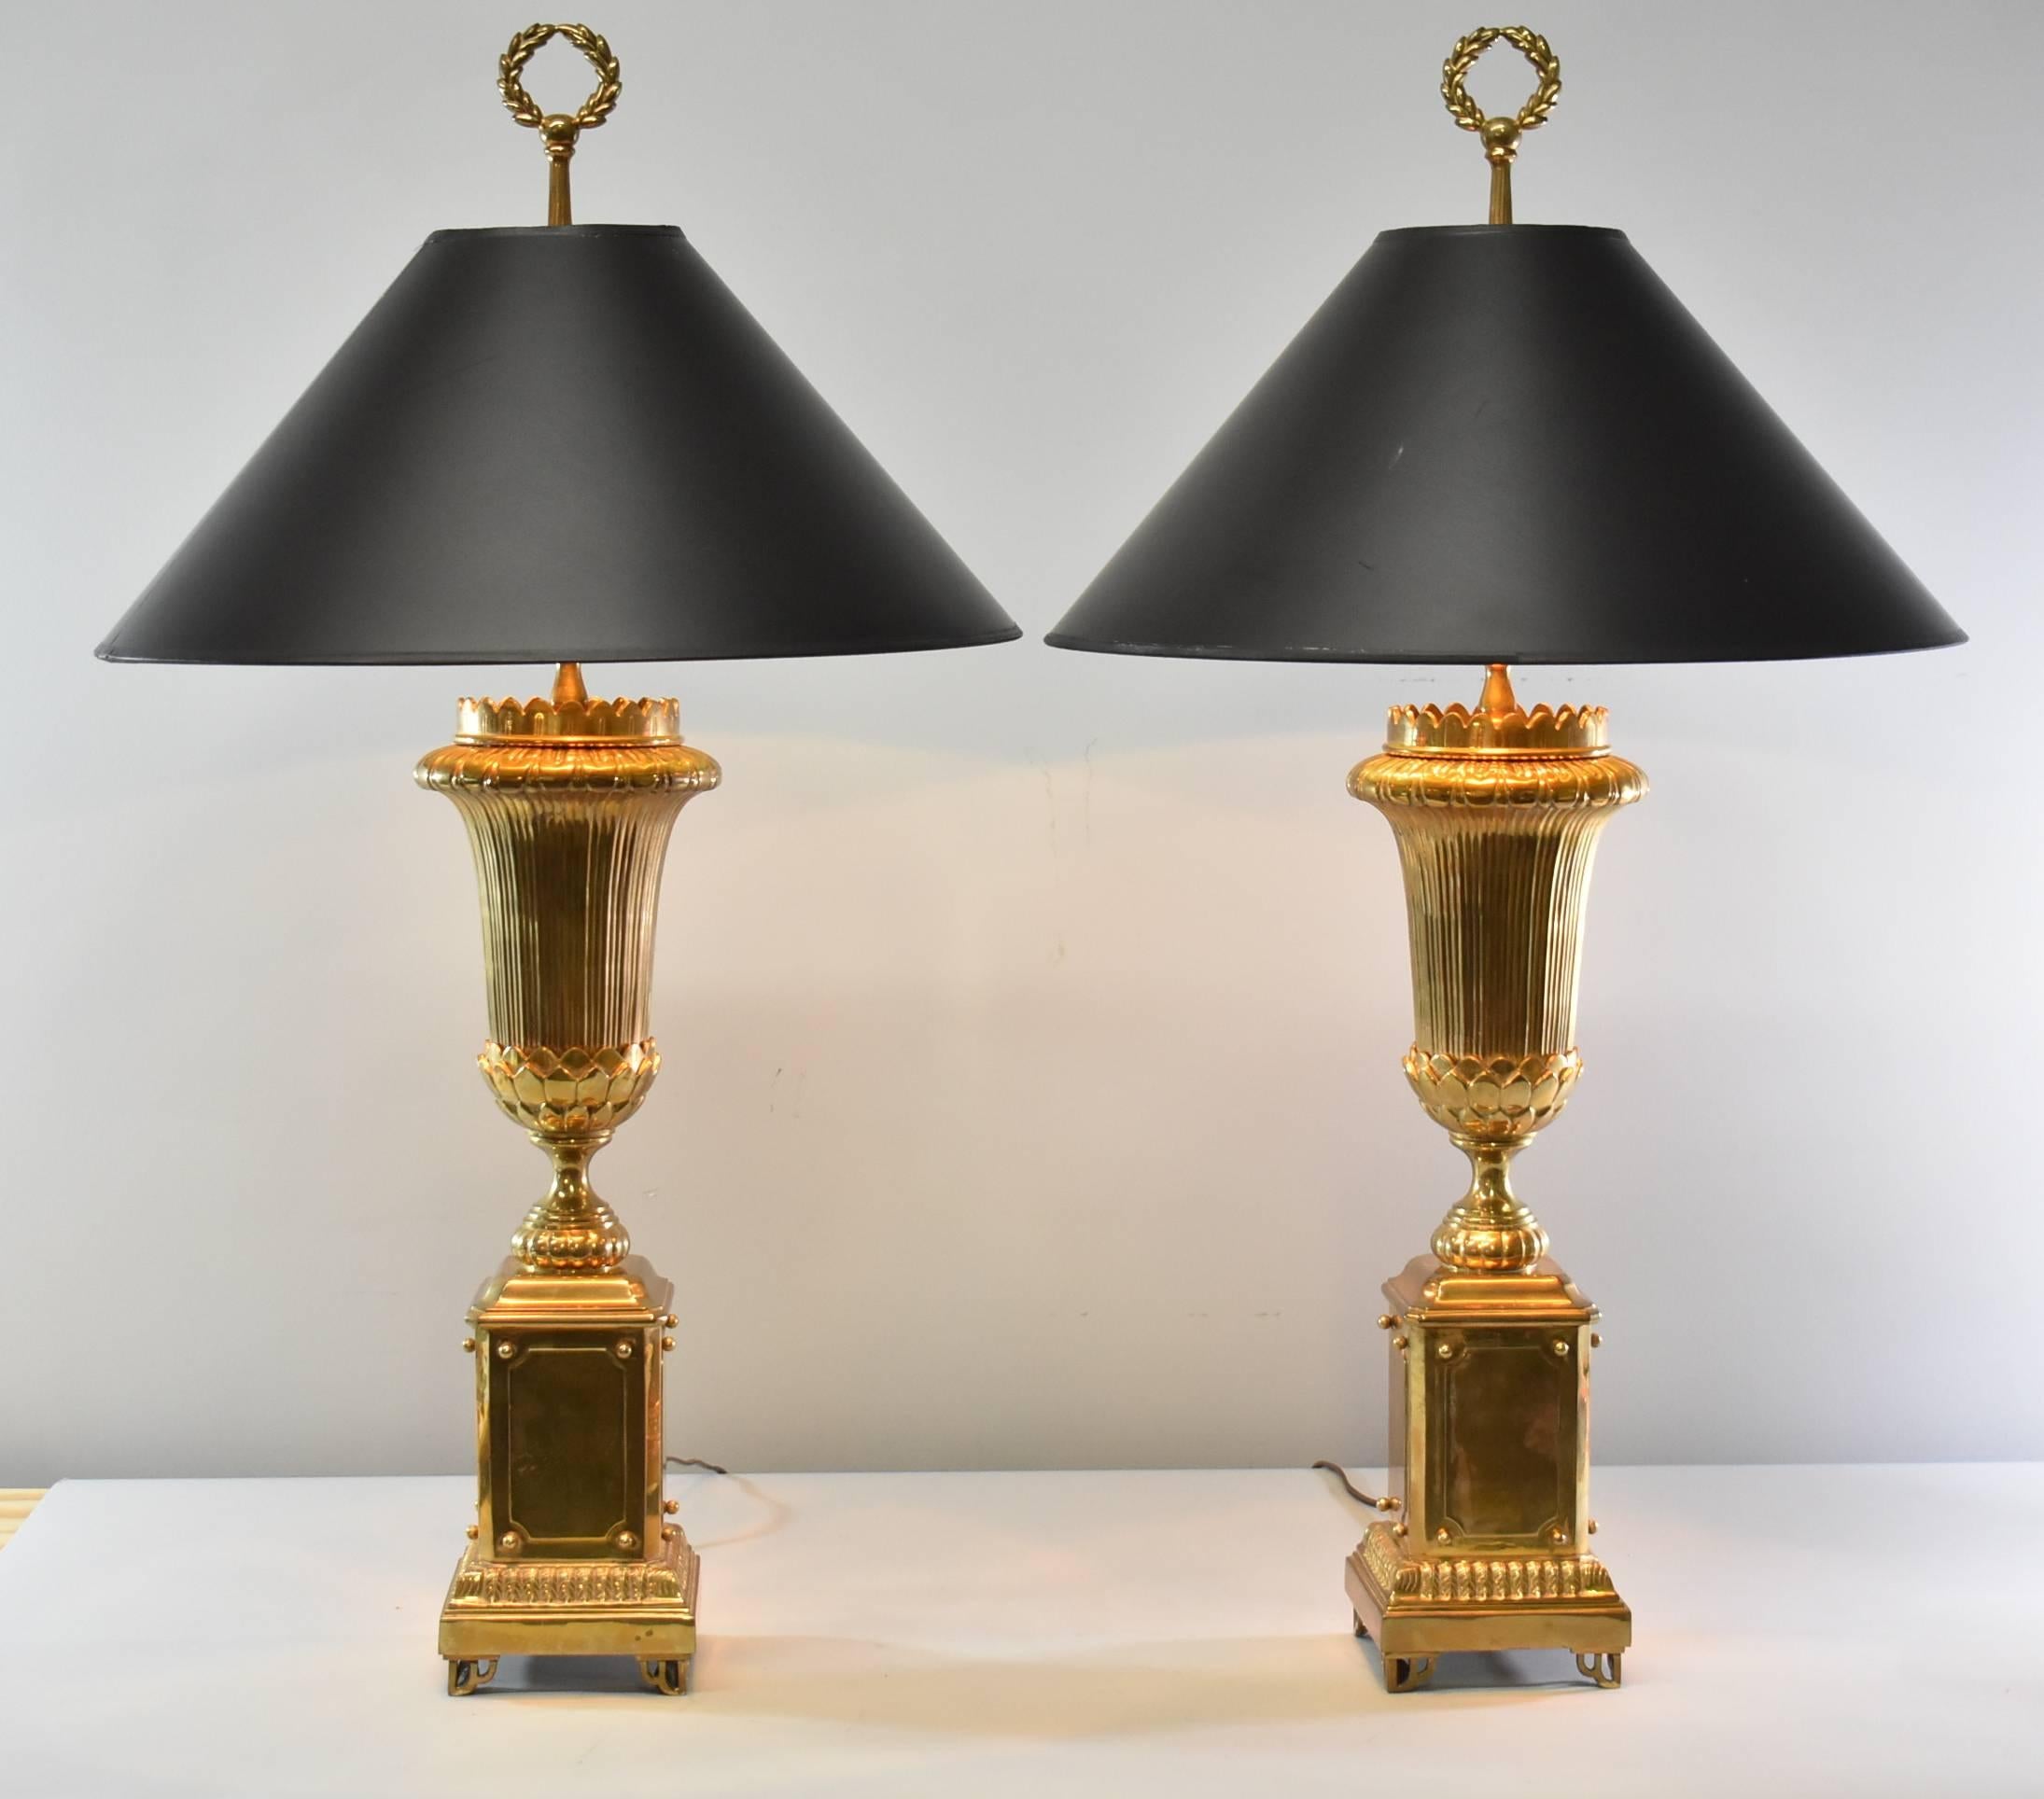 An outstanding pair of brass lamps by Chapman. These lovely lamps feature a square shape base with a torch form and a wreath finial. Sure to add style and elegance to any room. Very good condition with some minor wear to the brass.